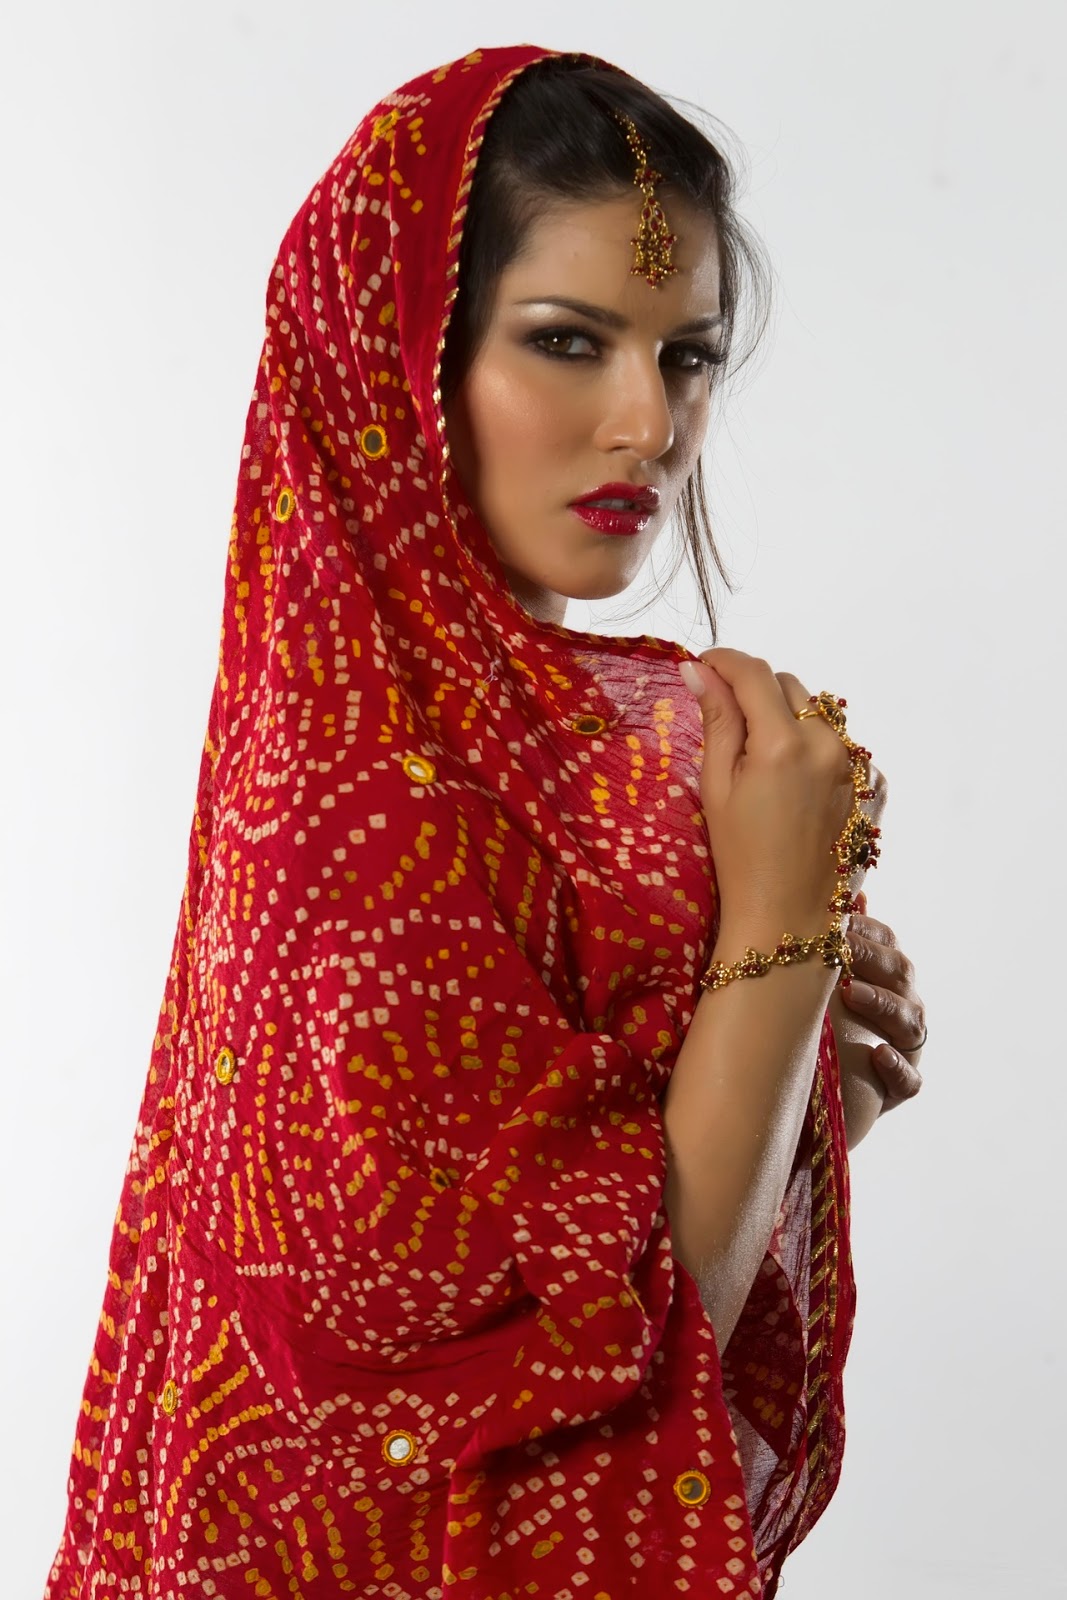 Sunny Leone hot pictures in typical Indian dress, looking gorgeous. 